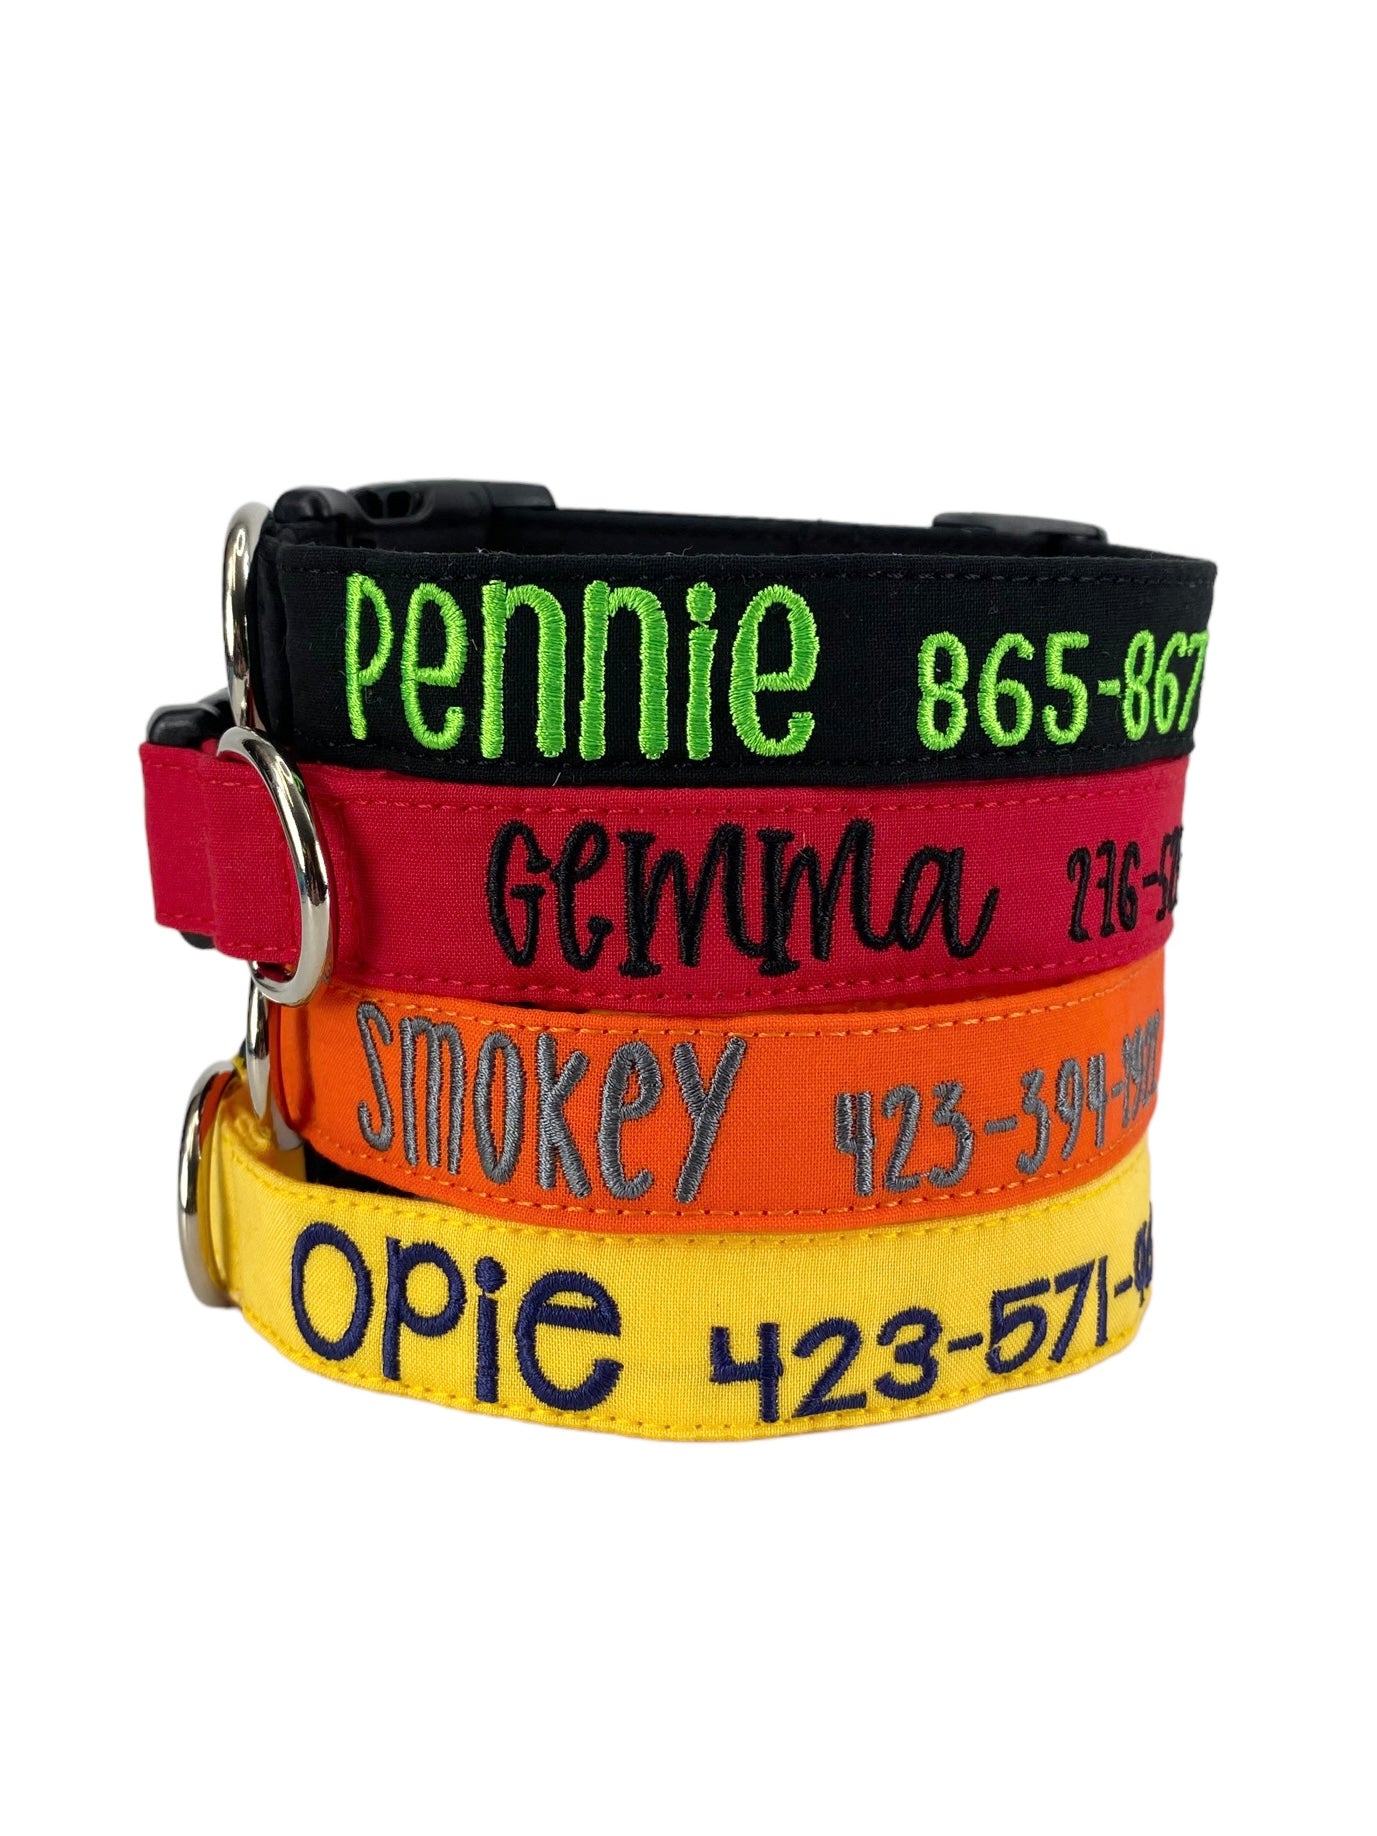 Personalized Dog Collars, Embroidered Dog Collars